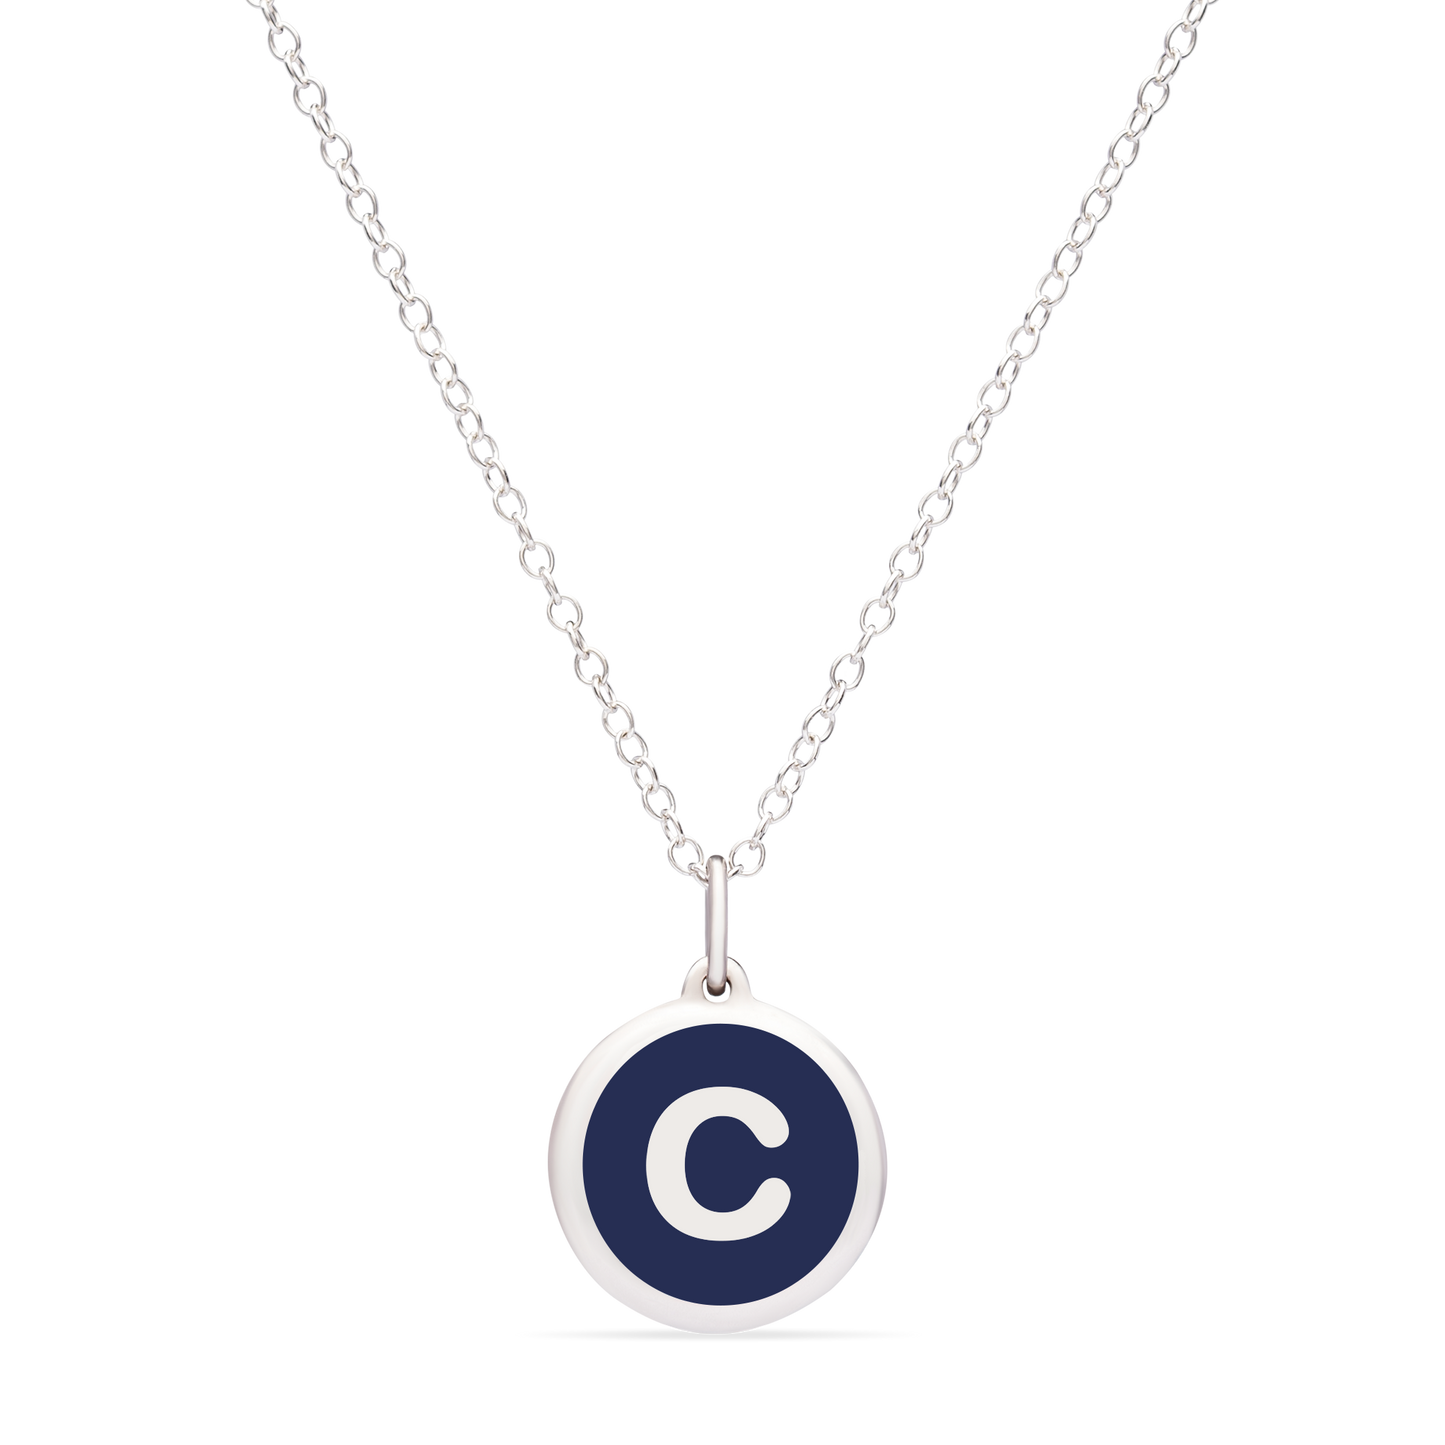 MINI INITIAL 'c' CHARM sterling silver with rhodium plate